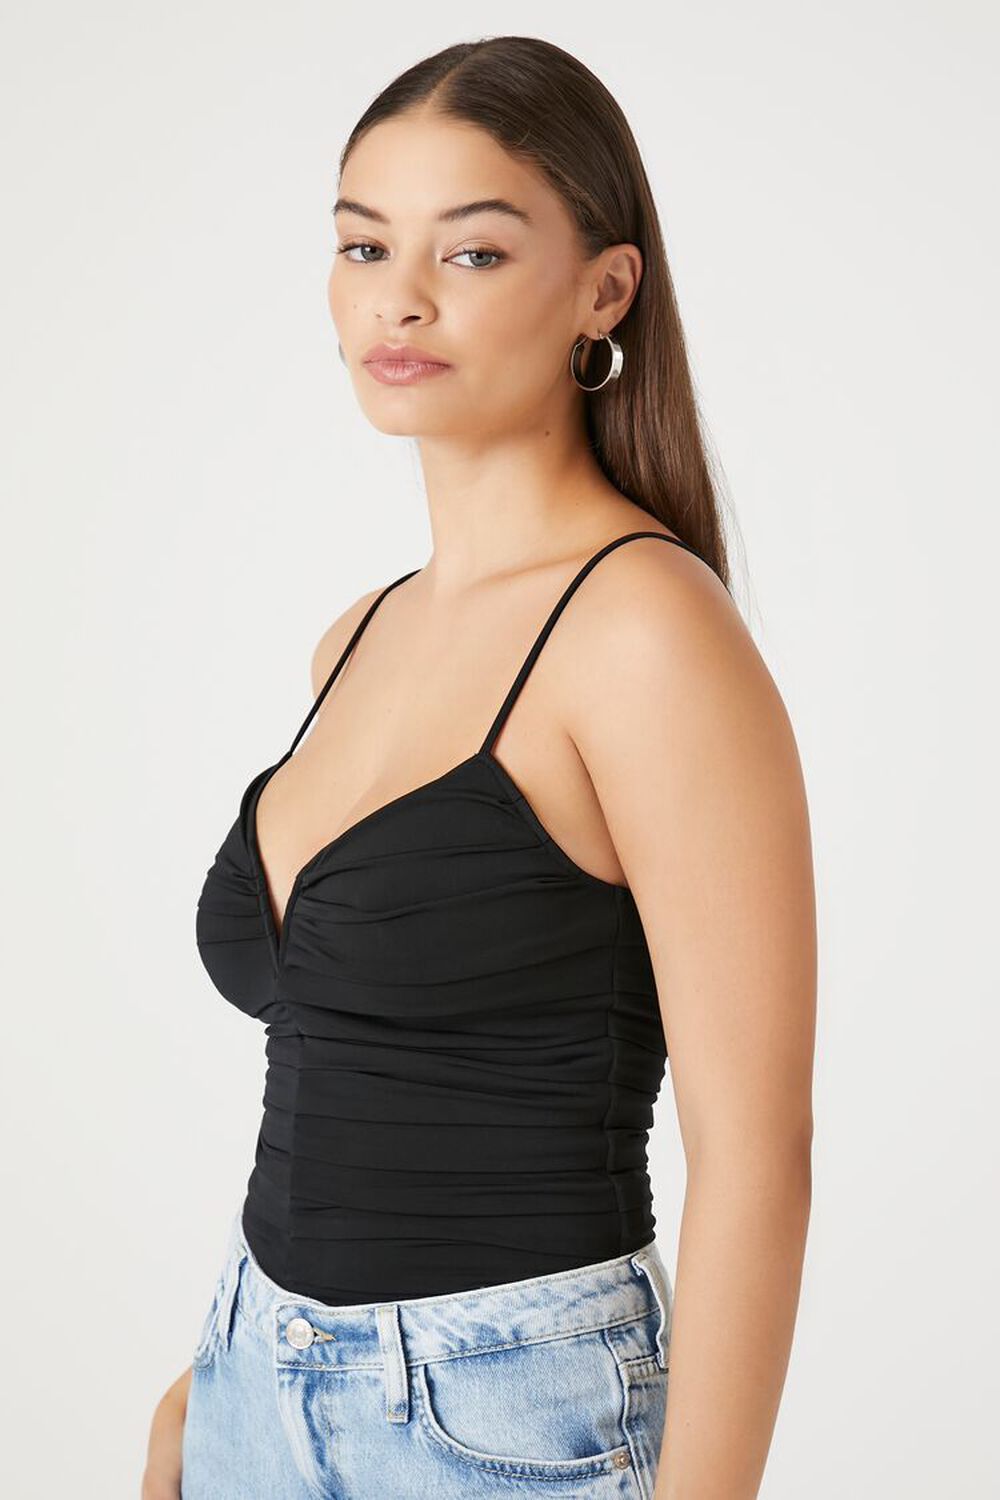 Forever 21 Women's Ruched Lace-Up Cami in Black Small